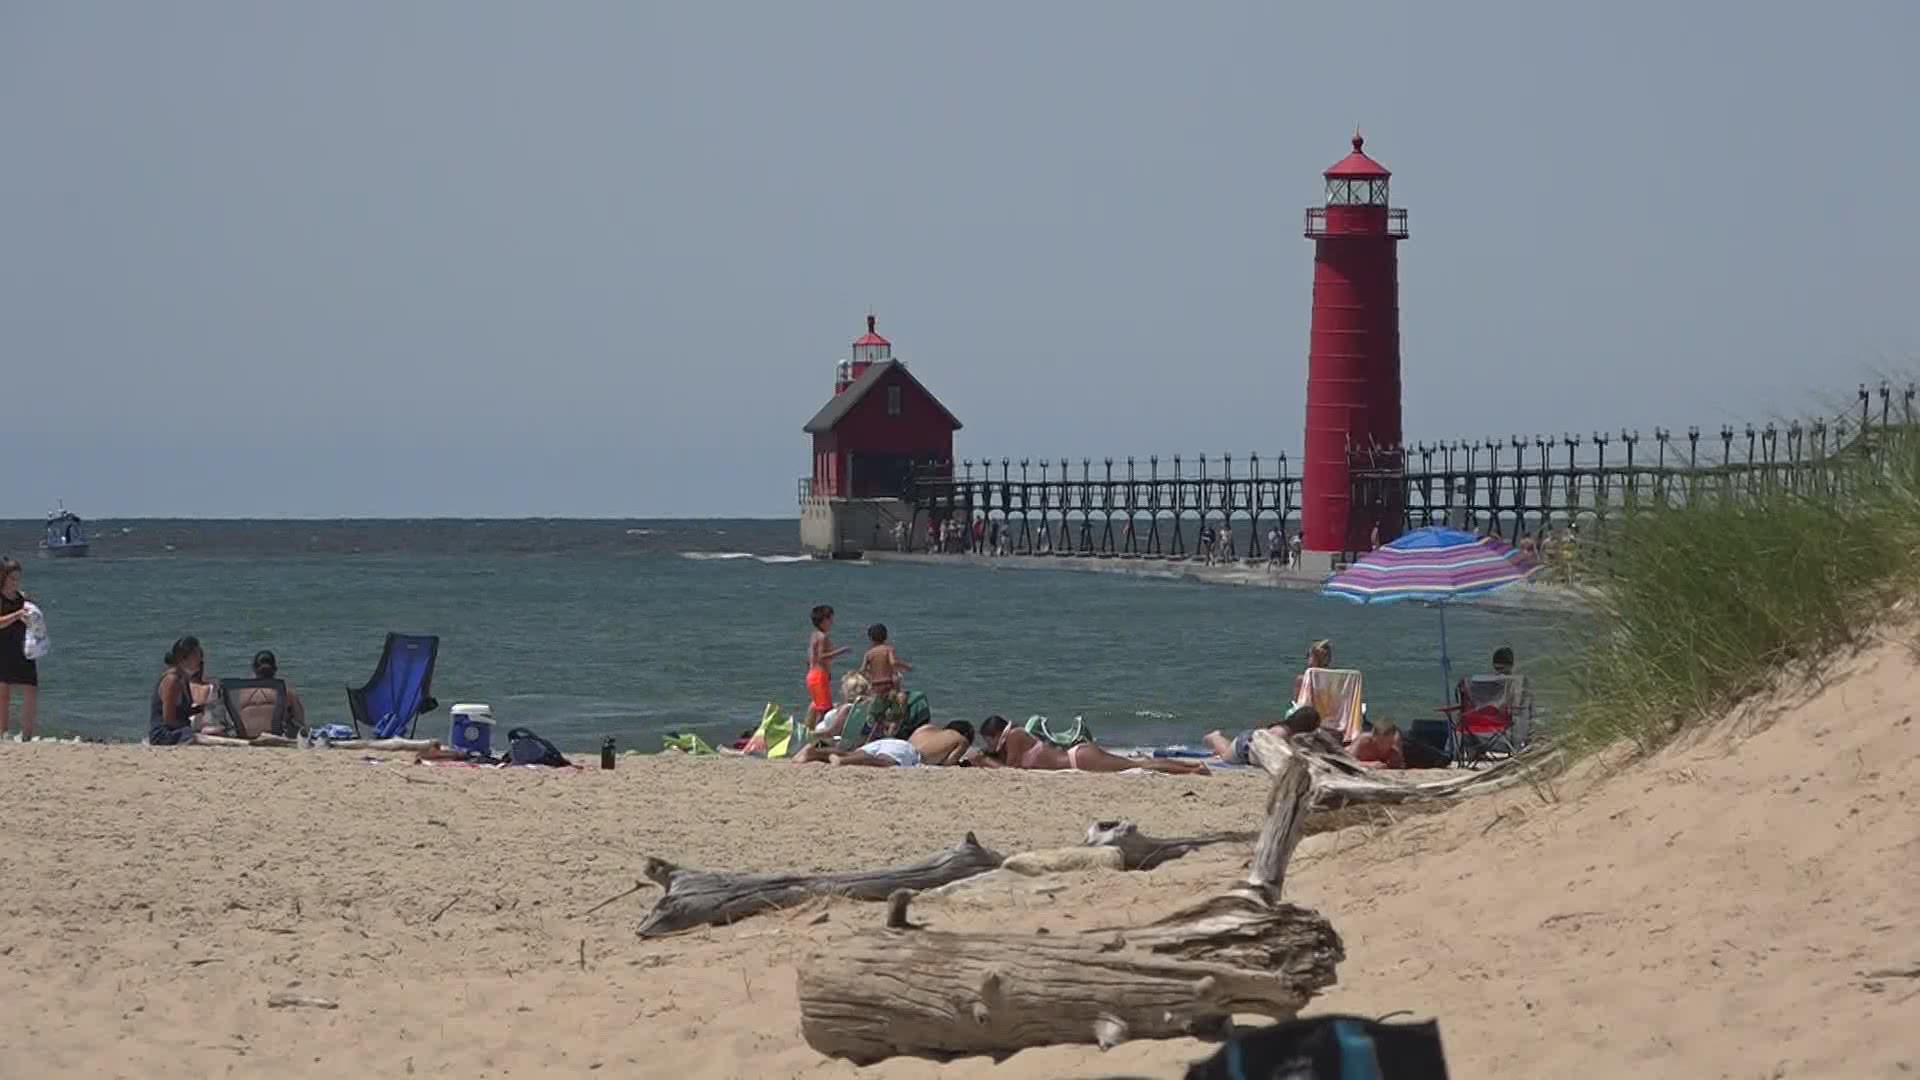 3rd day of searching for missing teen at Grand Haven State Park